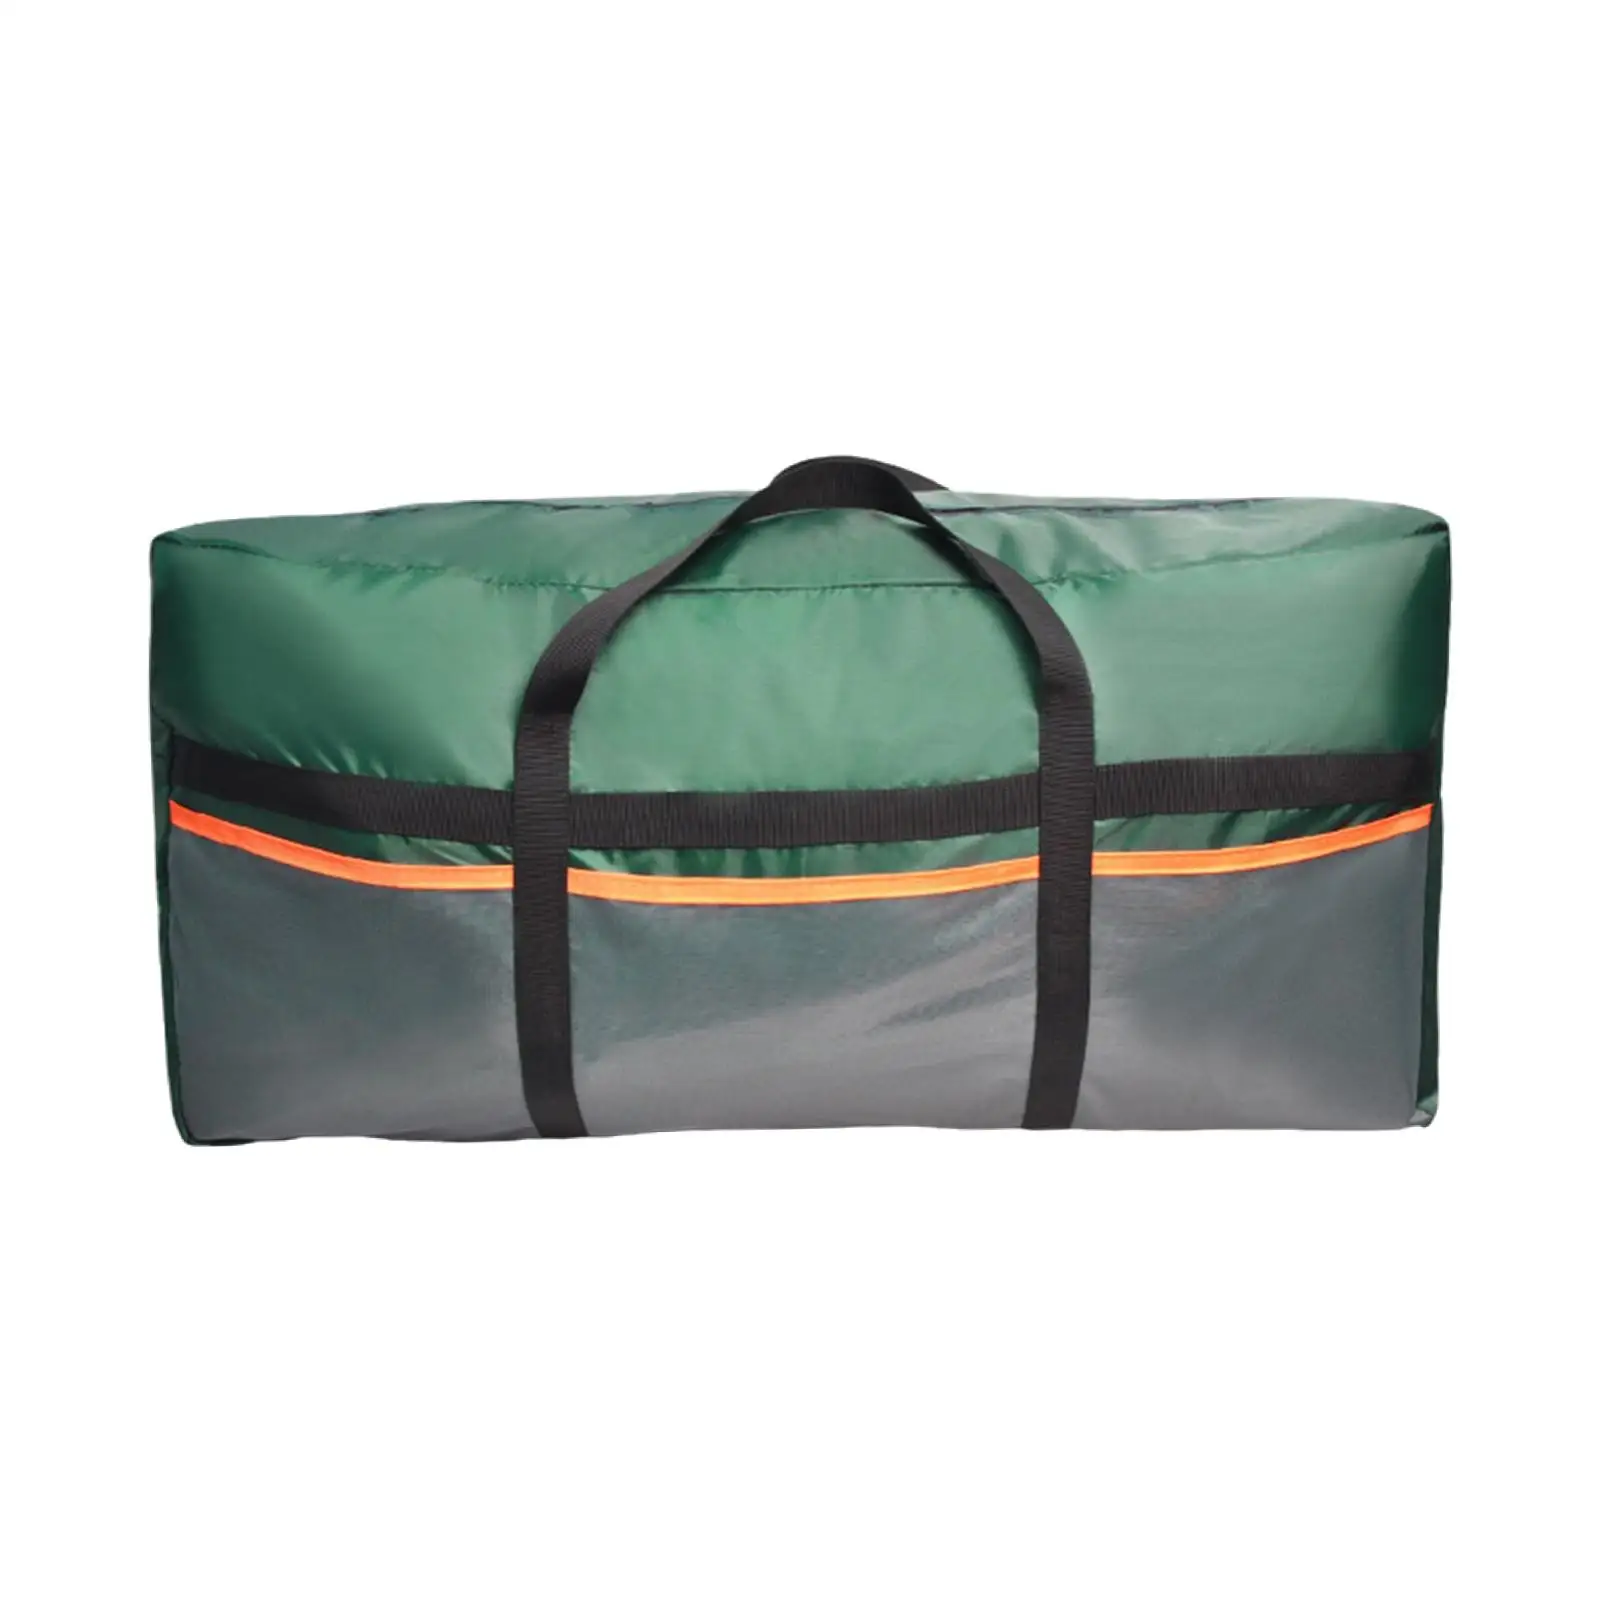 Tent Storage Bag Water Resistant Tote Bag Moving Clothes Bags Case High Capacity for Gardening Outdoor Beach Fishing Hiking